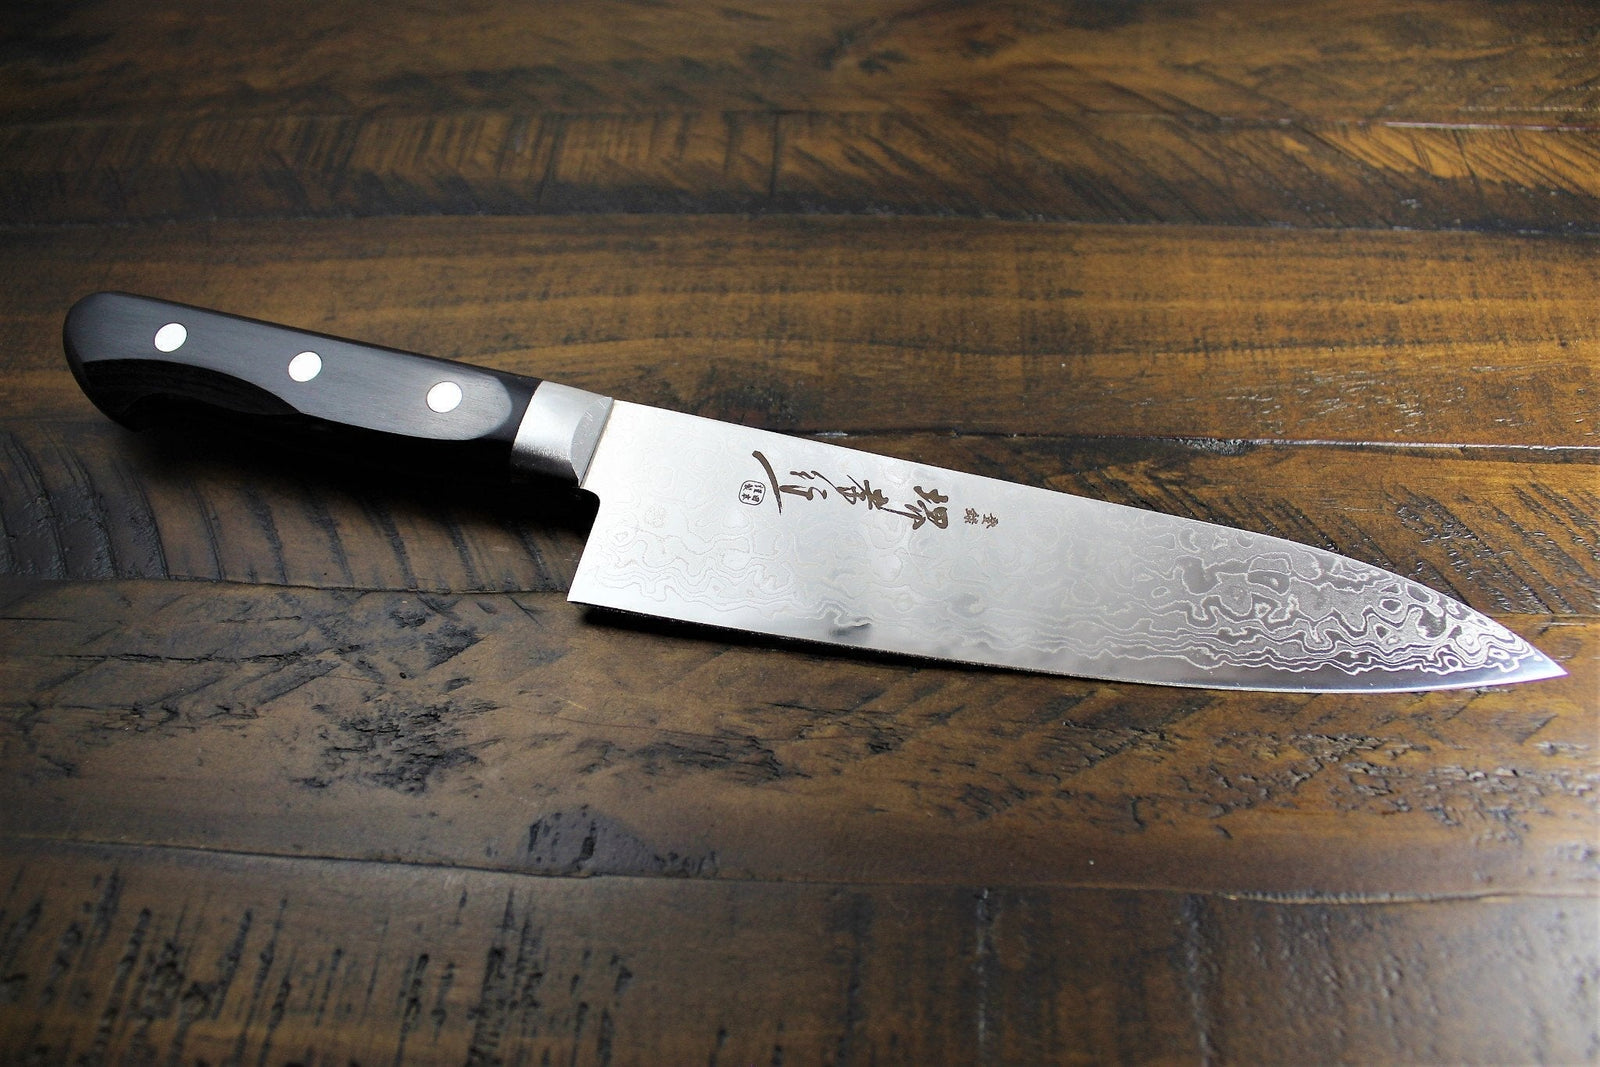 What's the difference between a Western and Japanese chef's knife